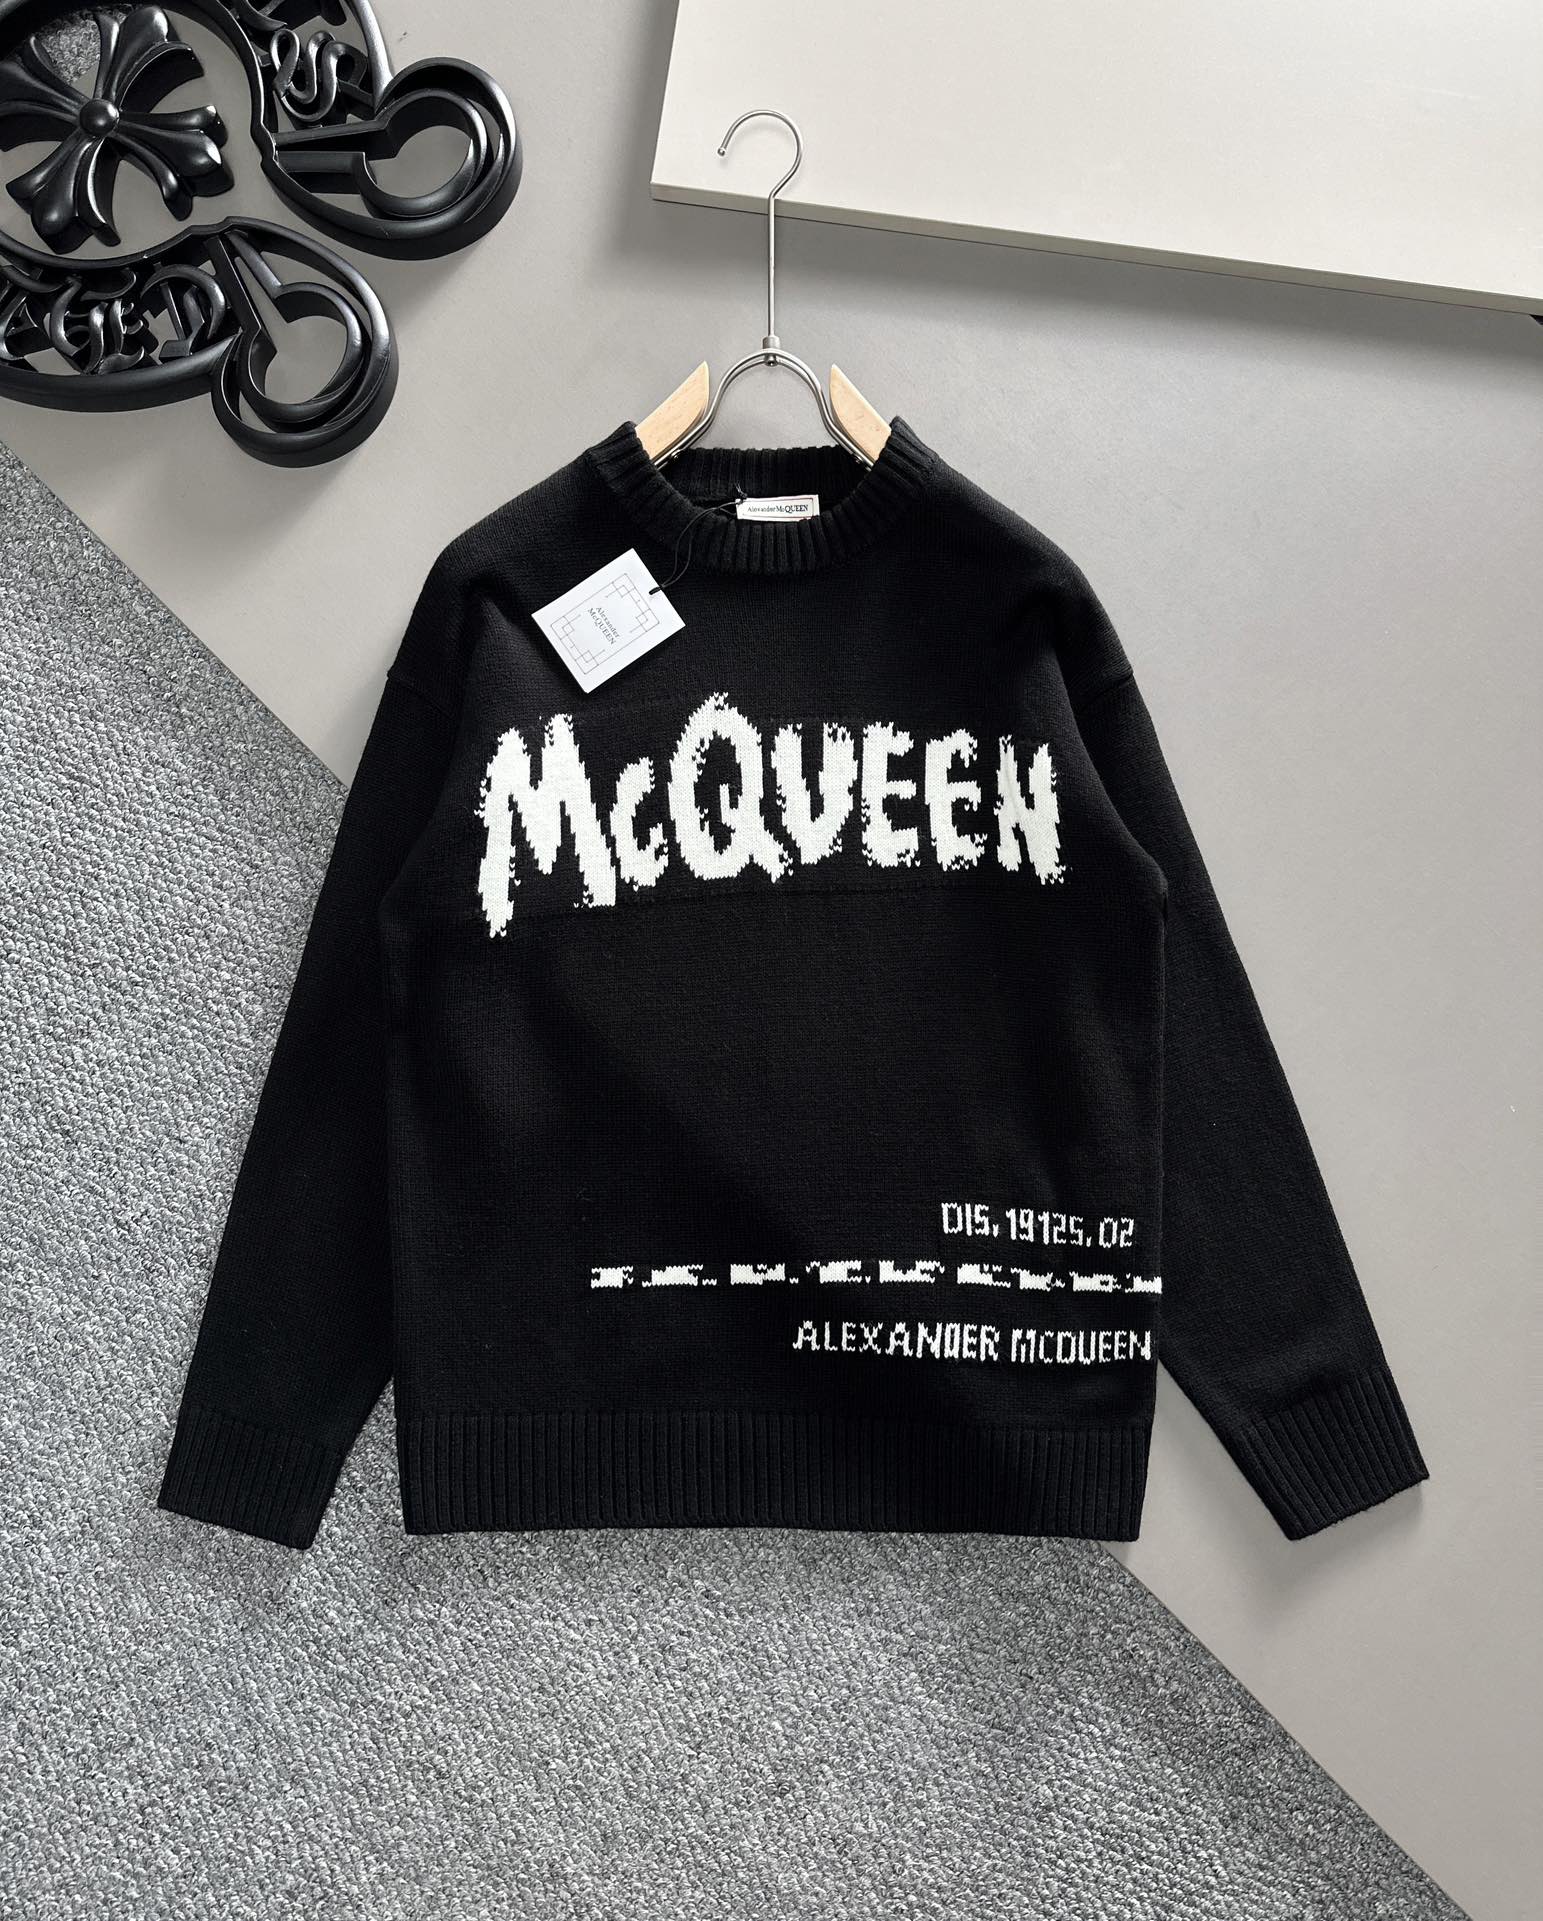 Alexander McQueen Clothing Sweatshirts Cashmere Spandex Wool Fall/Winter Collection